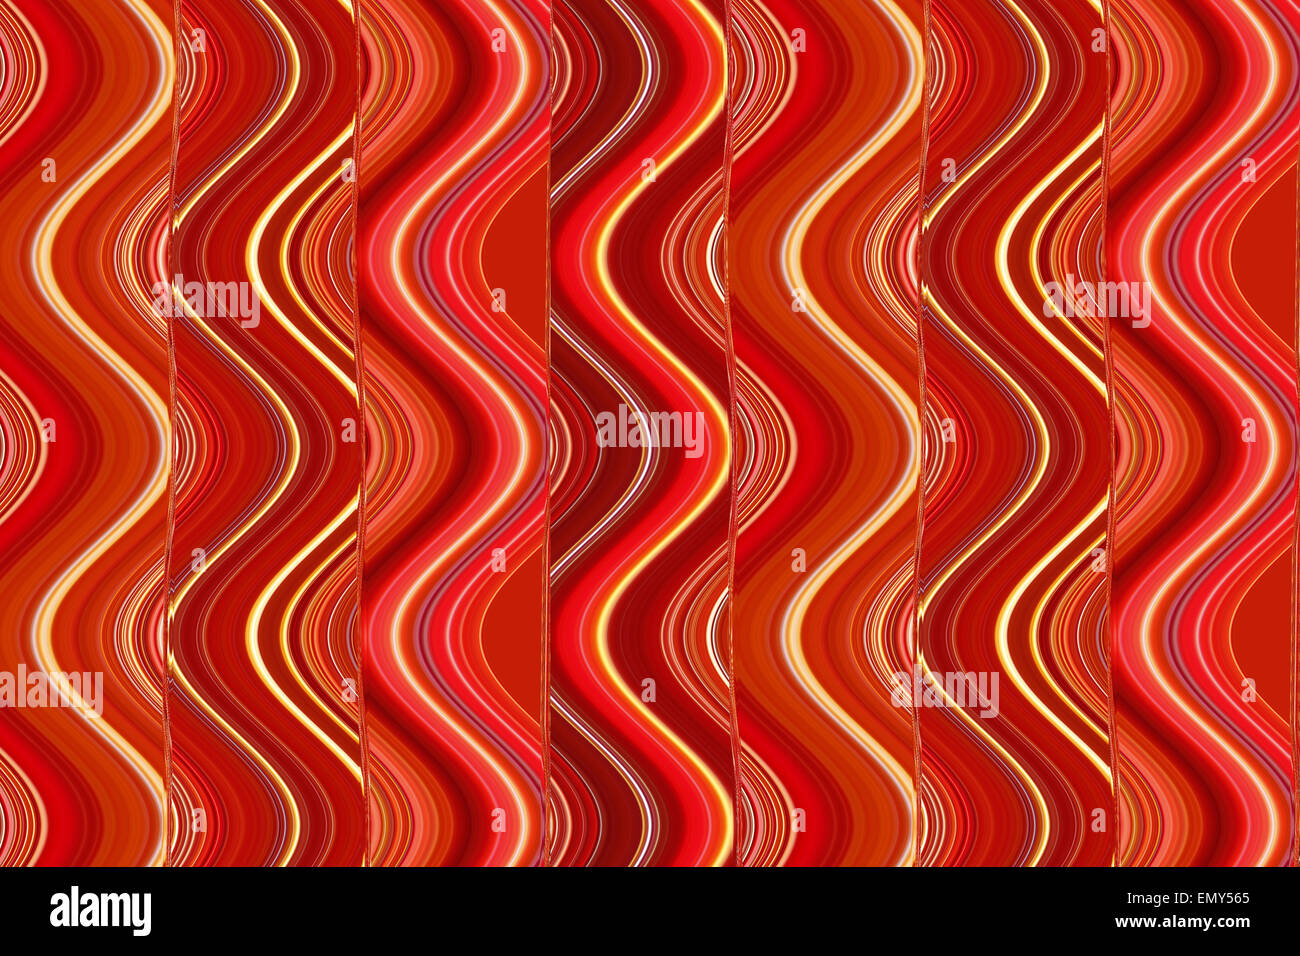 very red and unusual abstract texture with stripes Stock Photo